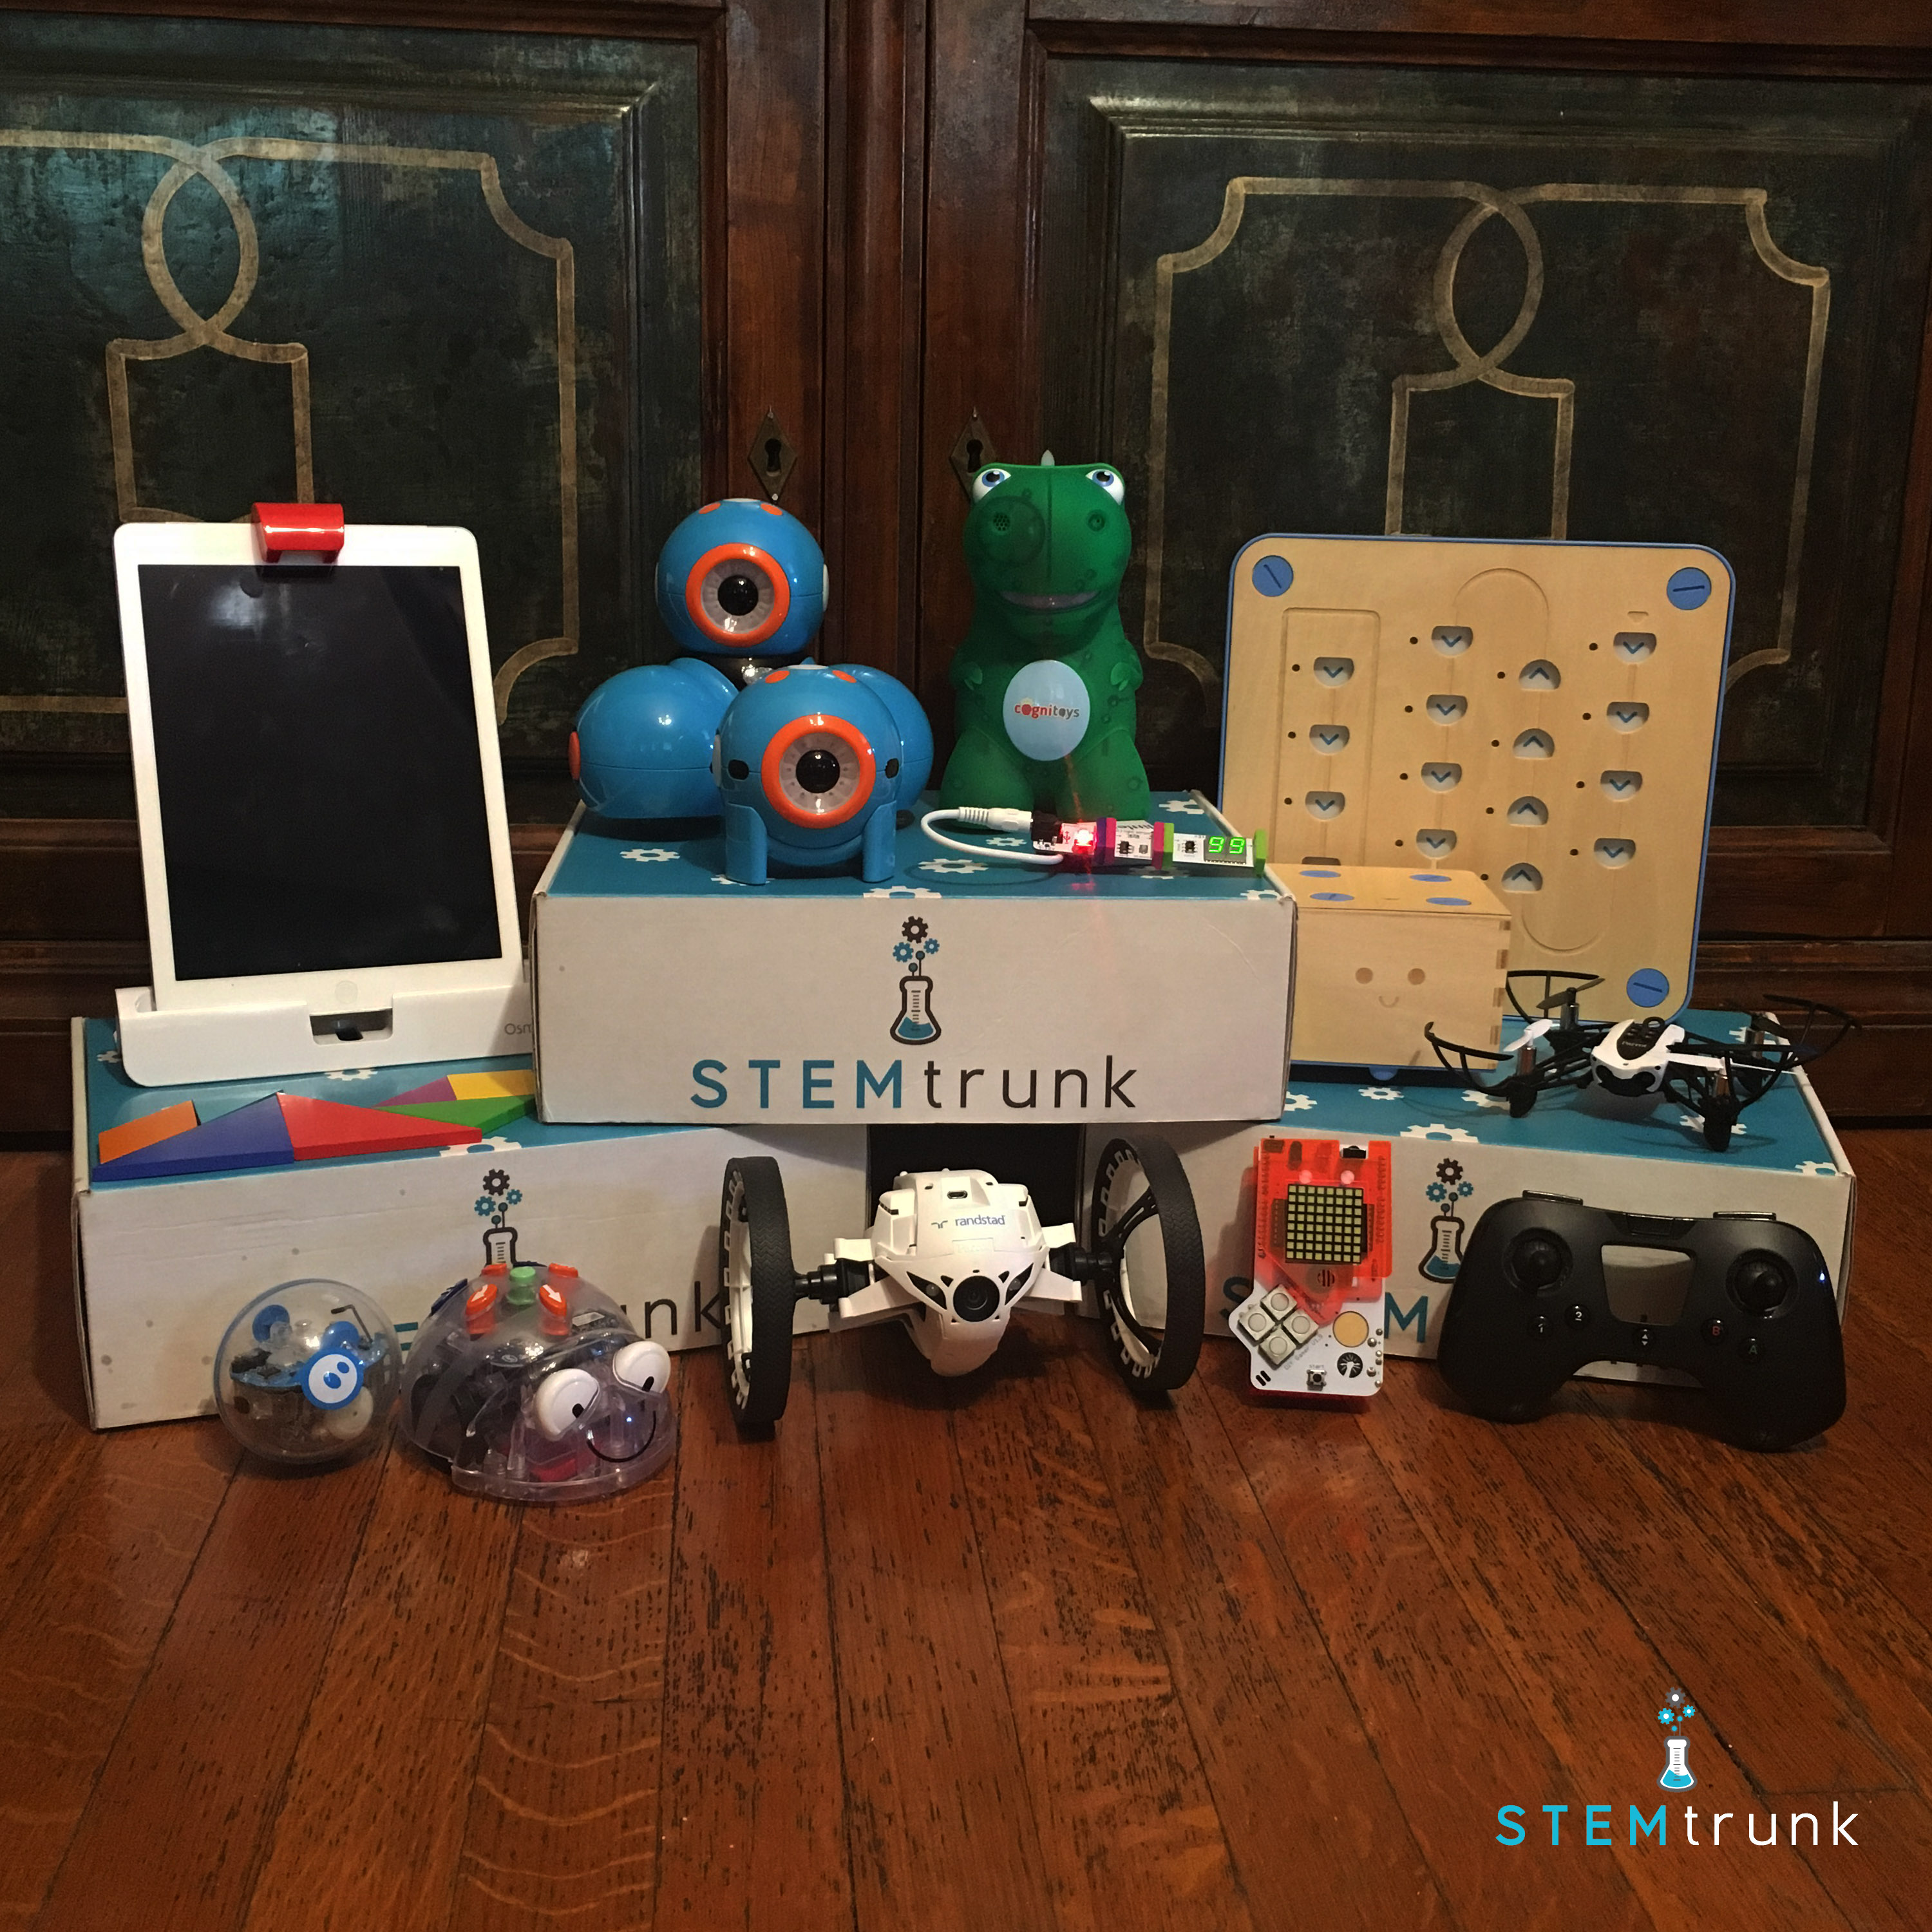 A selection of STEMtrunk products